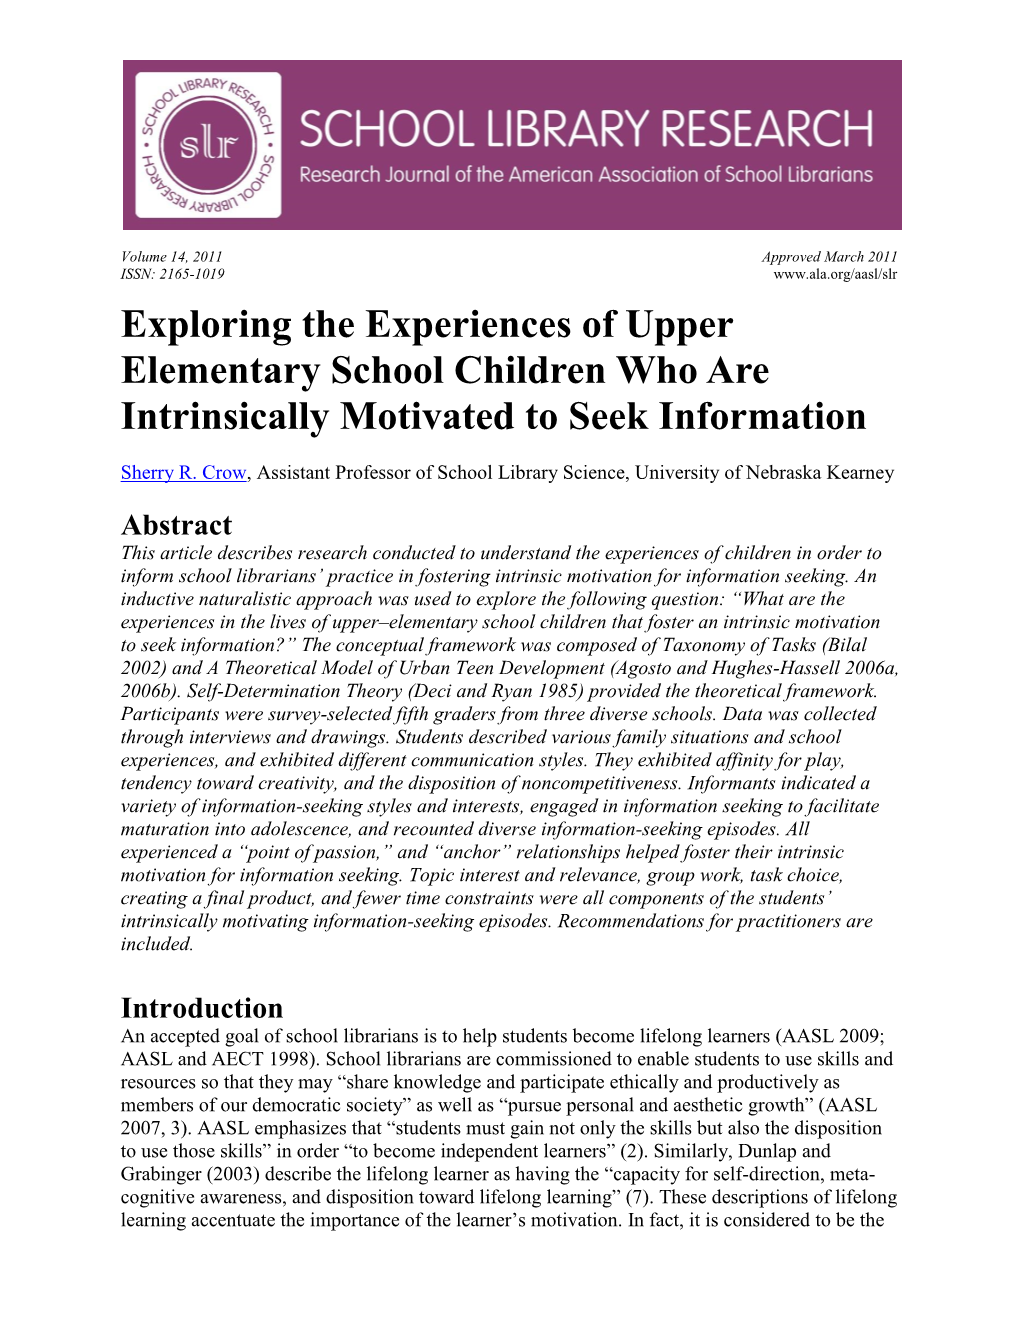 Exploring the Experiences of Upper Elementary School Children Who Are Intrinsically Motivated to Seek Information